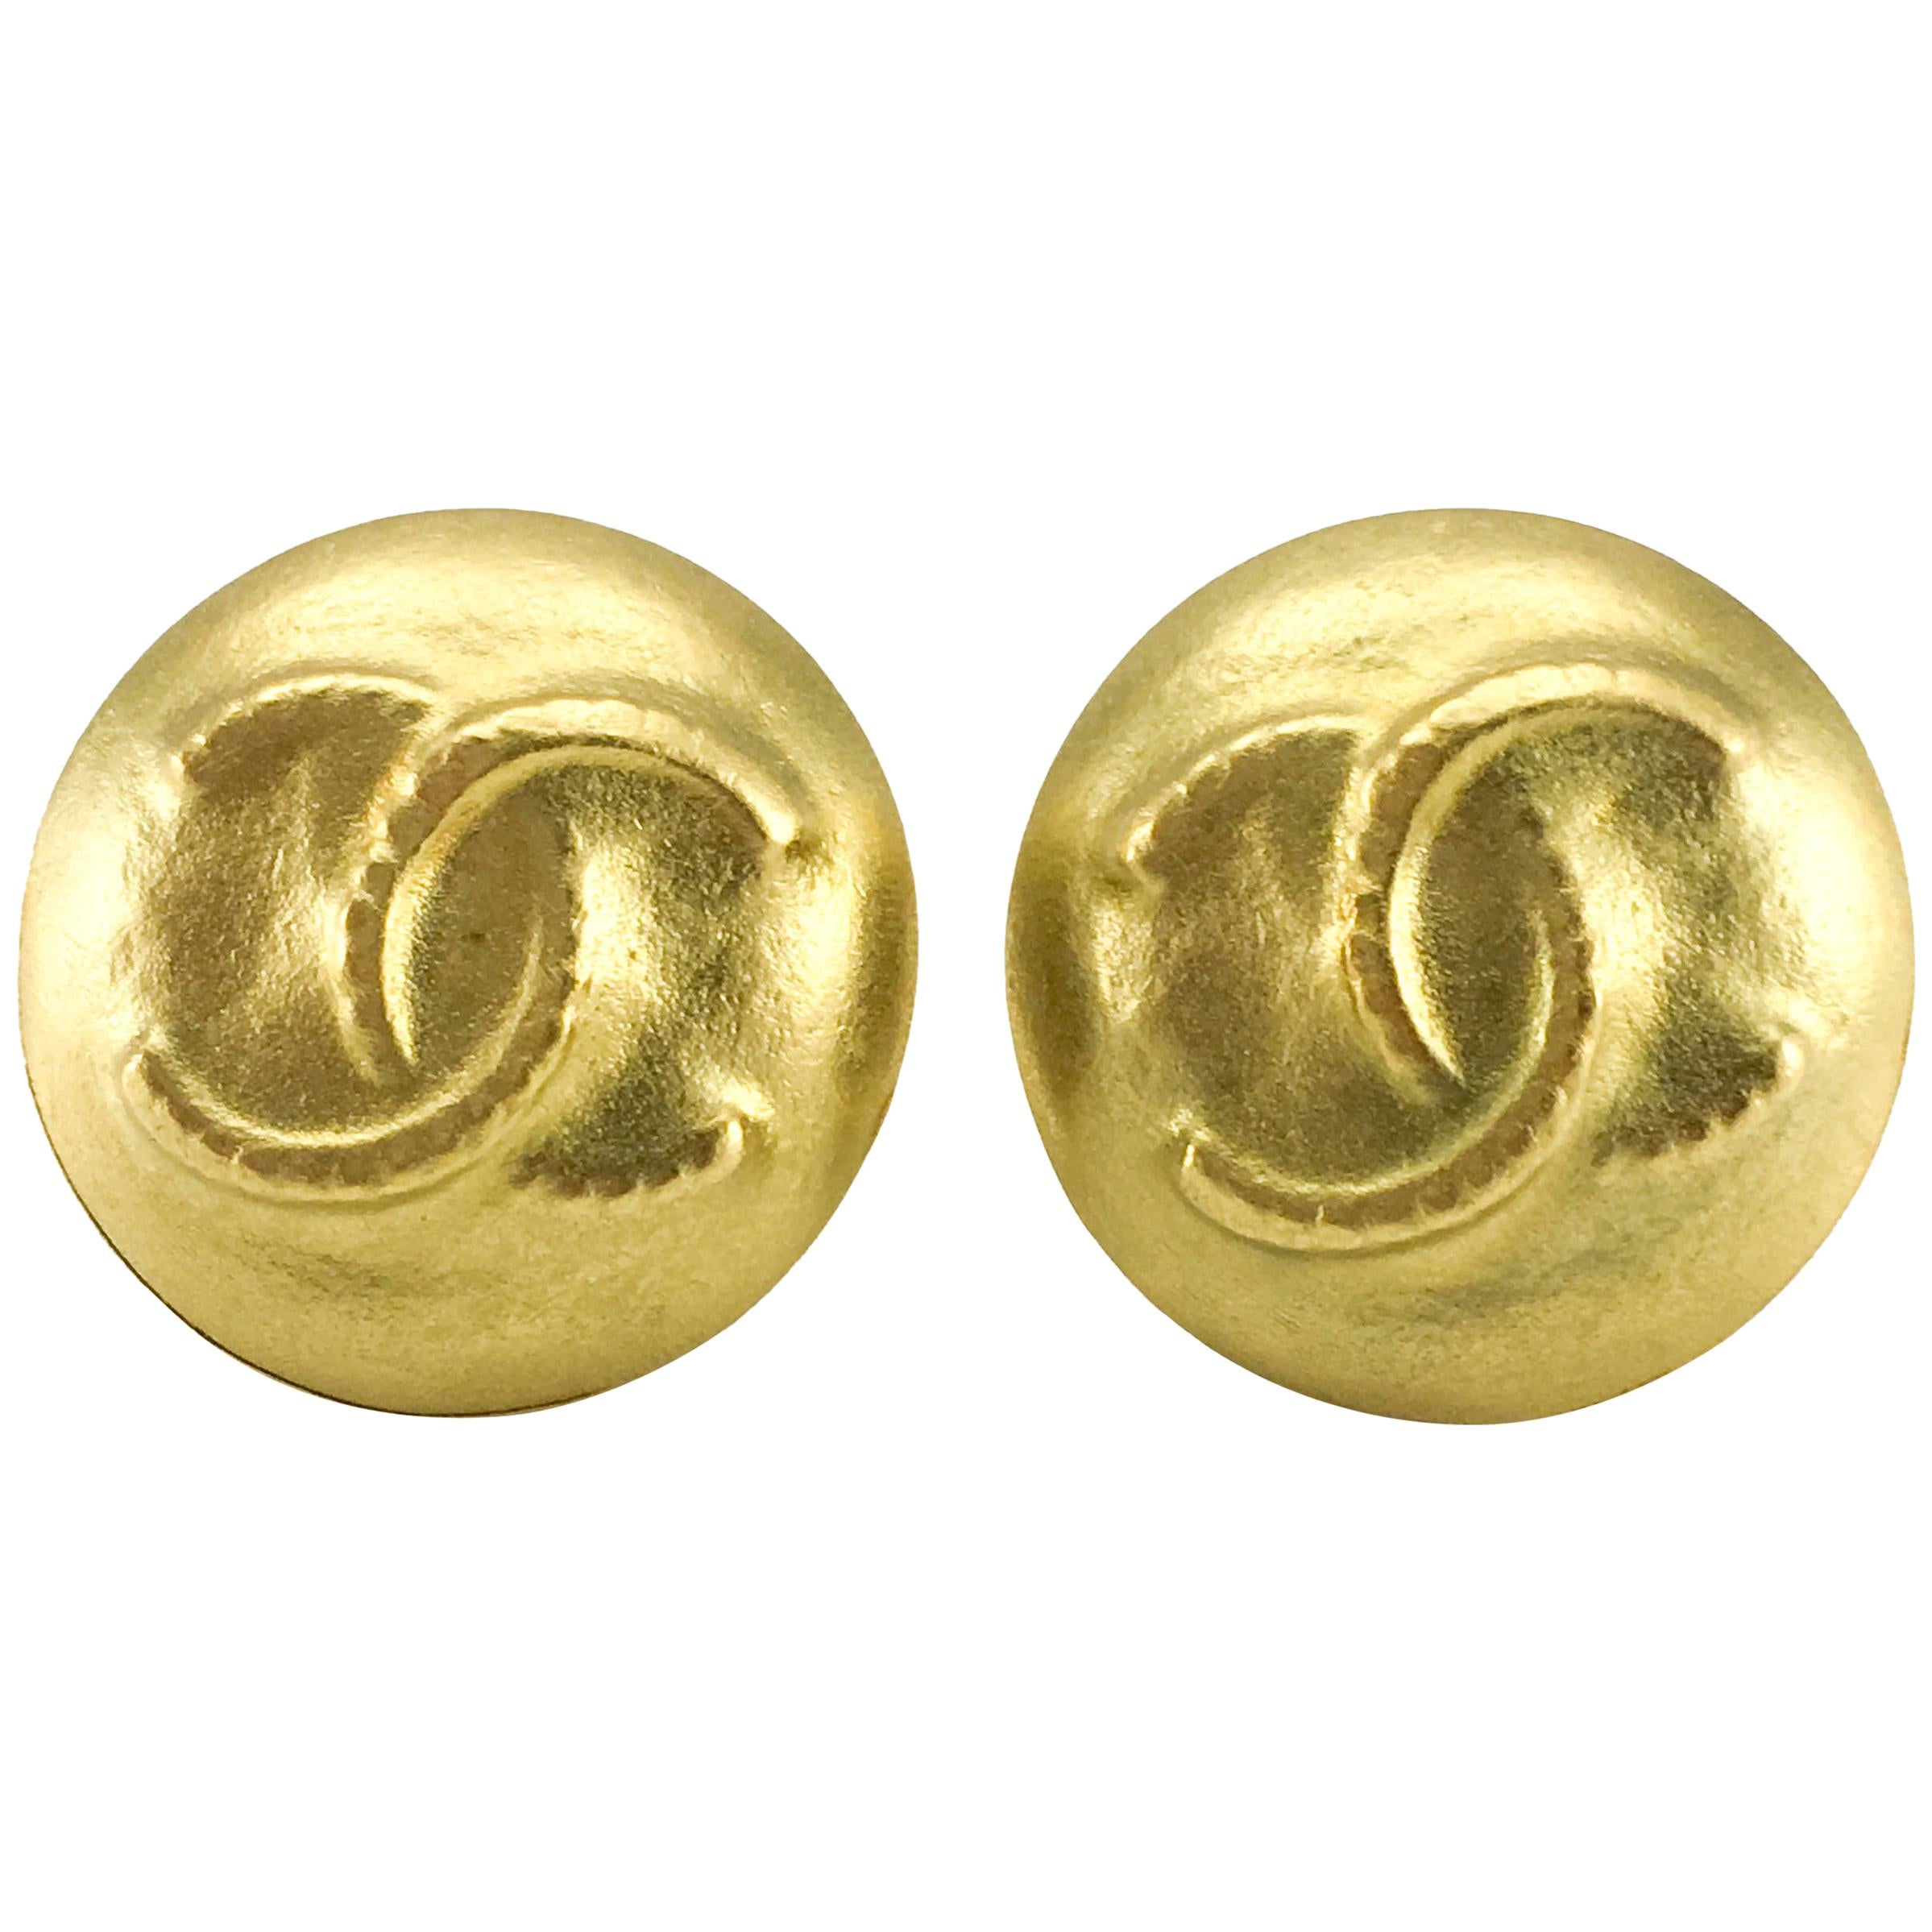 1995 Chanel Matte Gold-Plated Round Logo Earrings